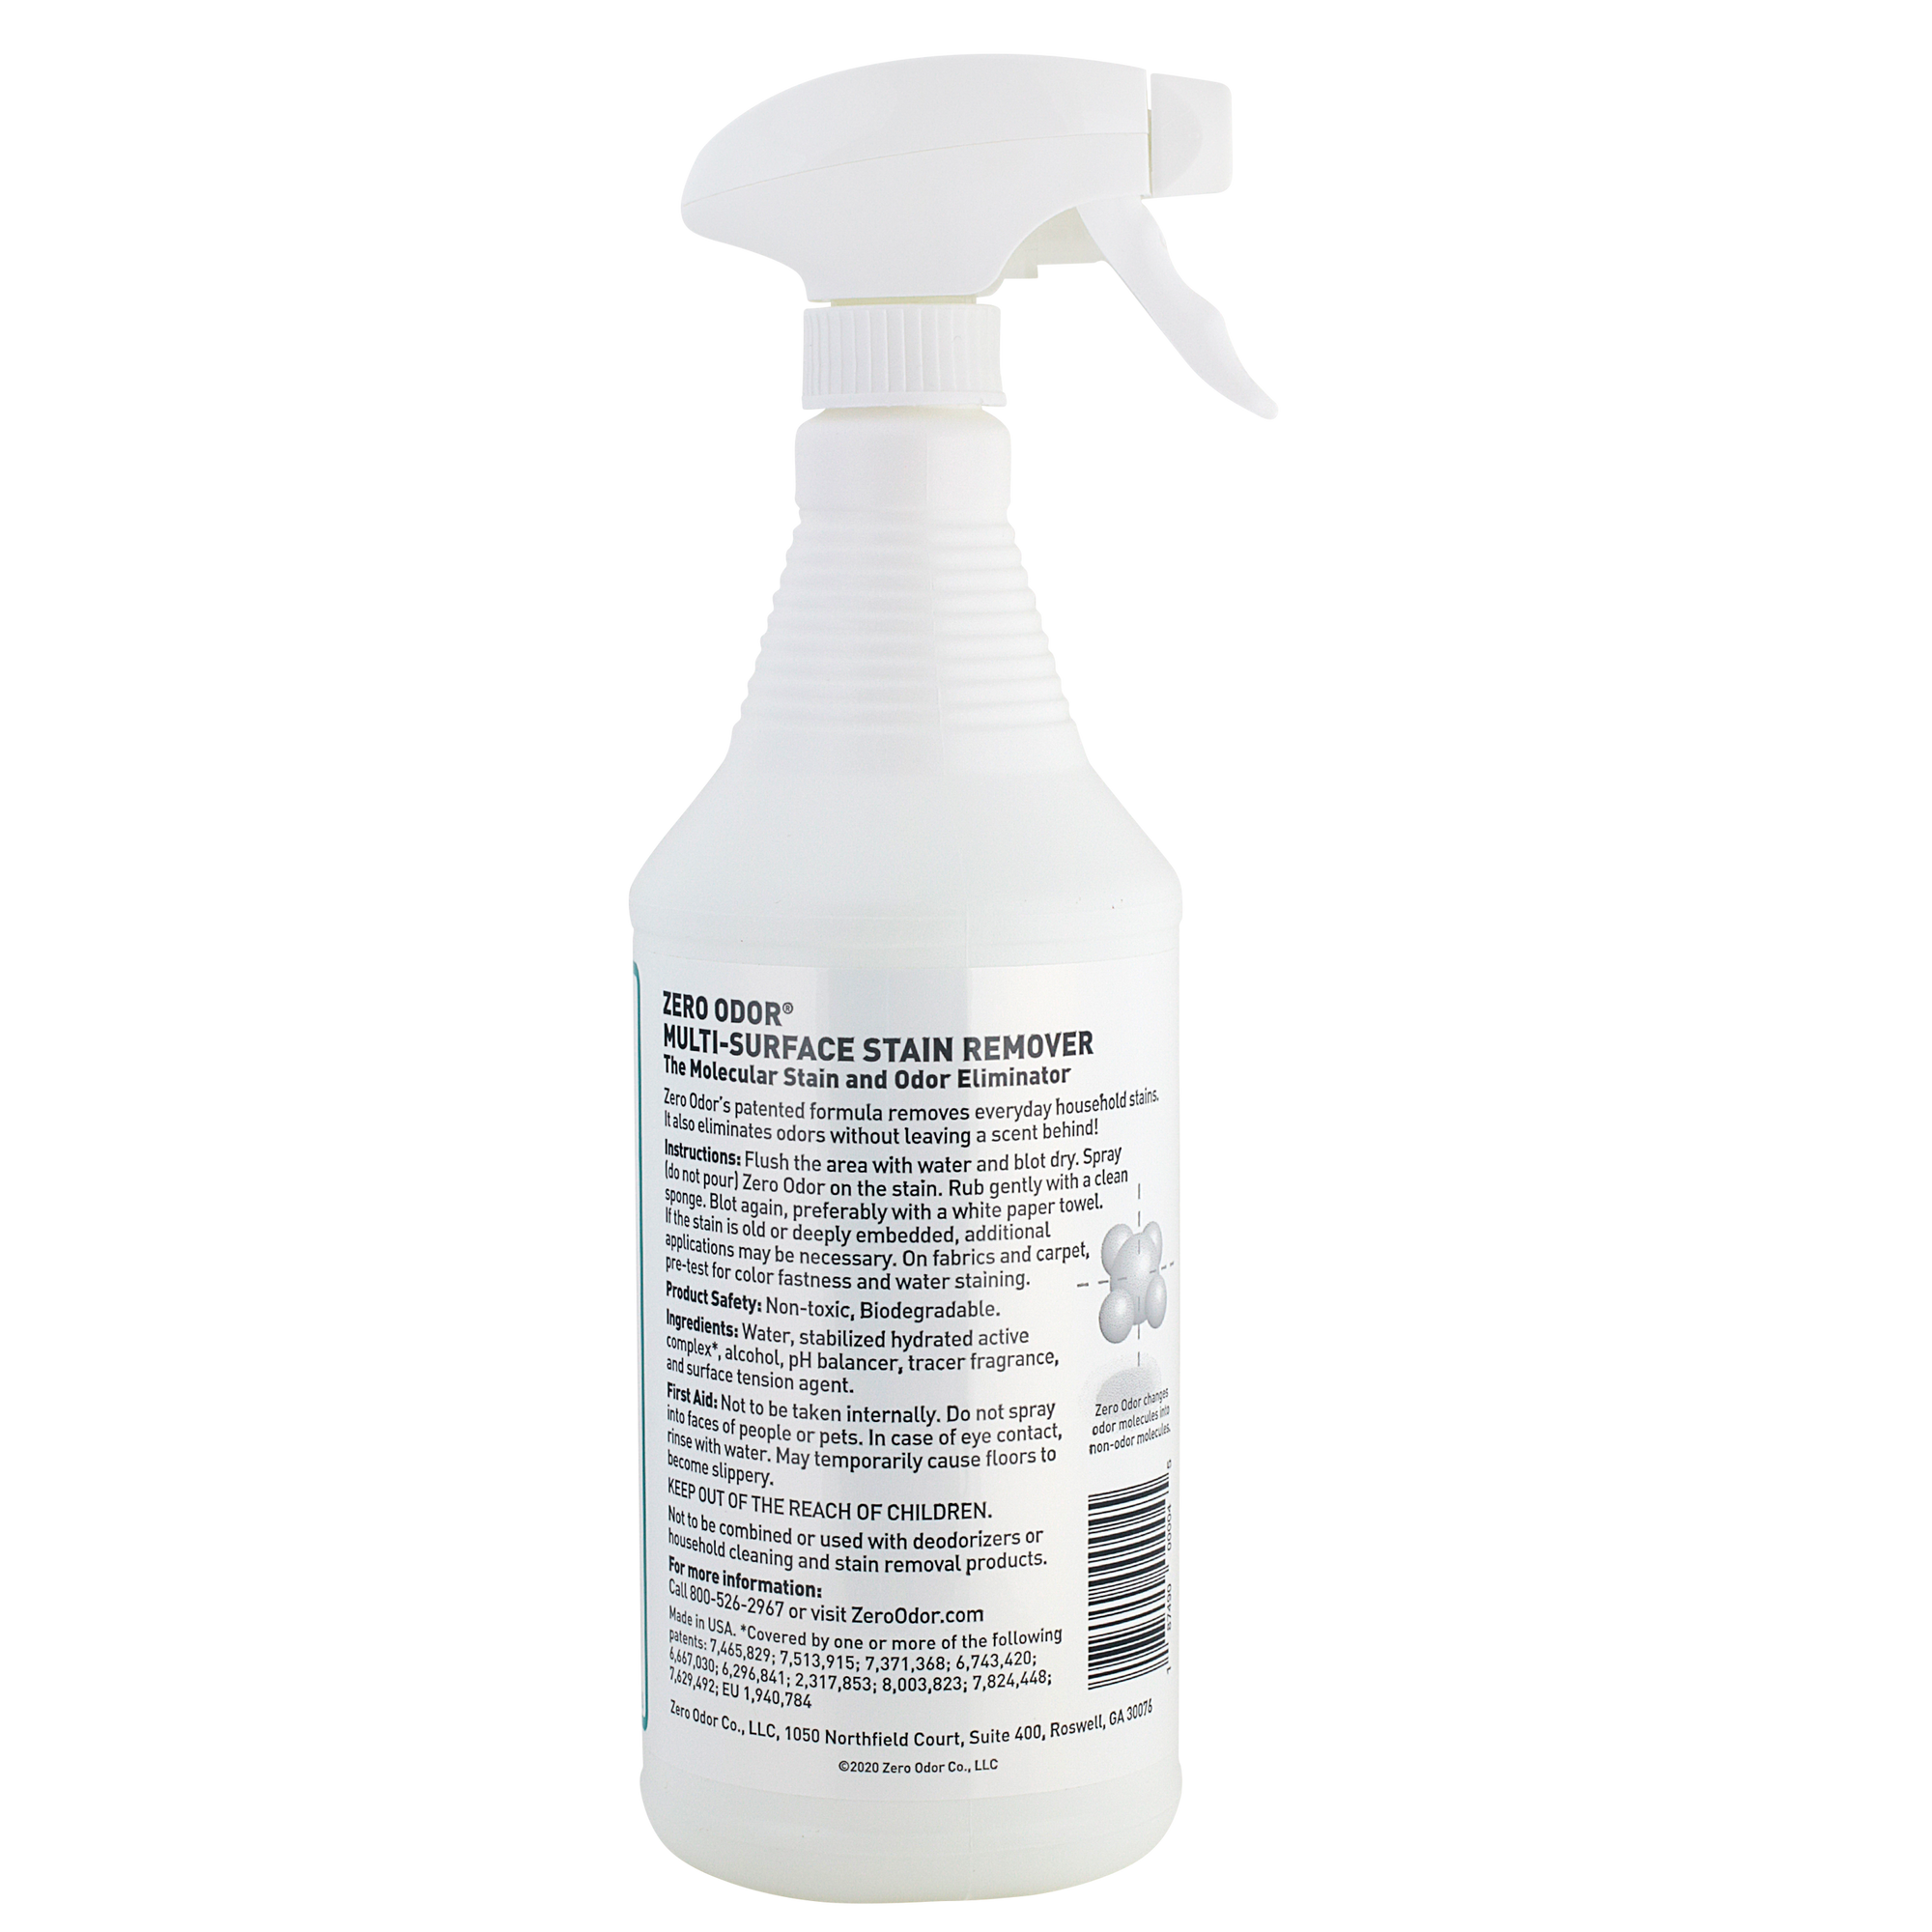 Multi-Surface Stain Remover